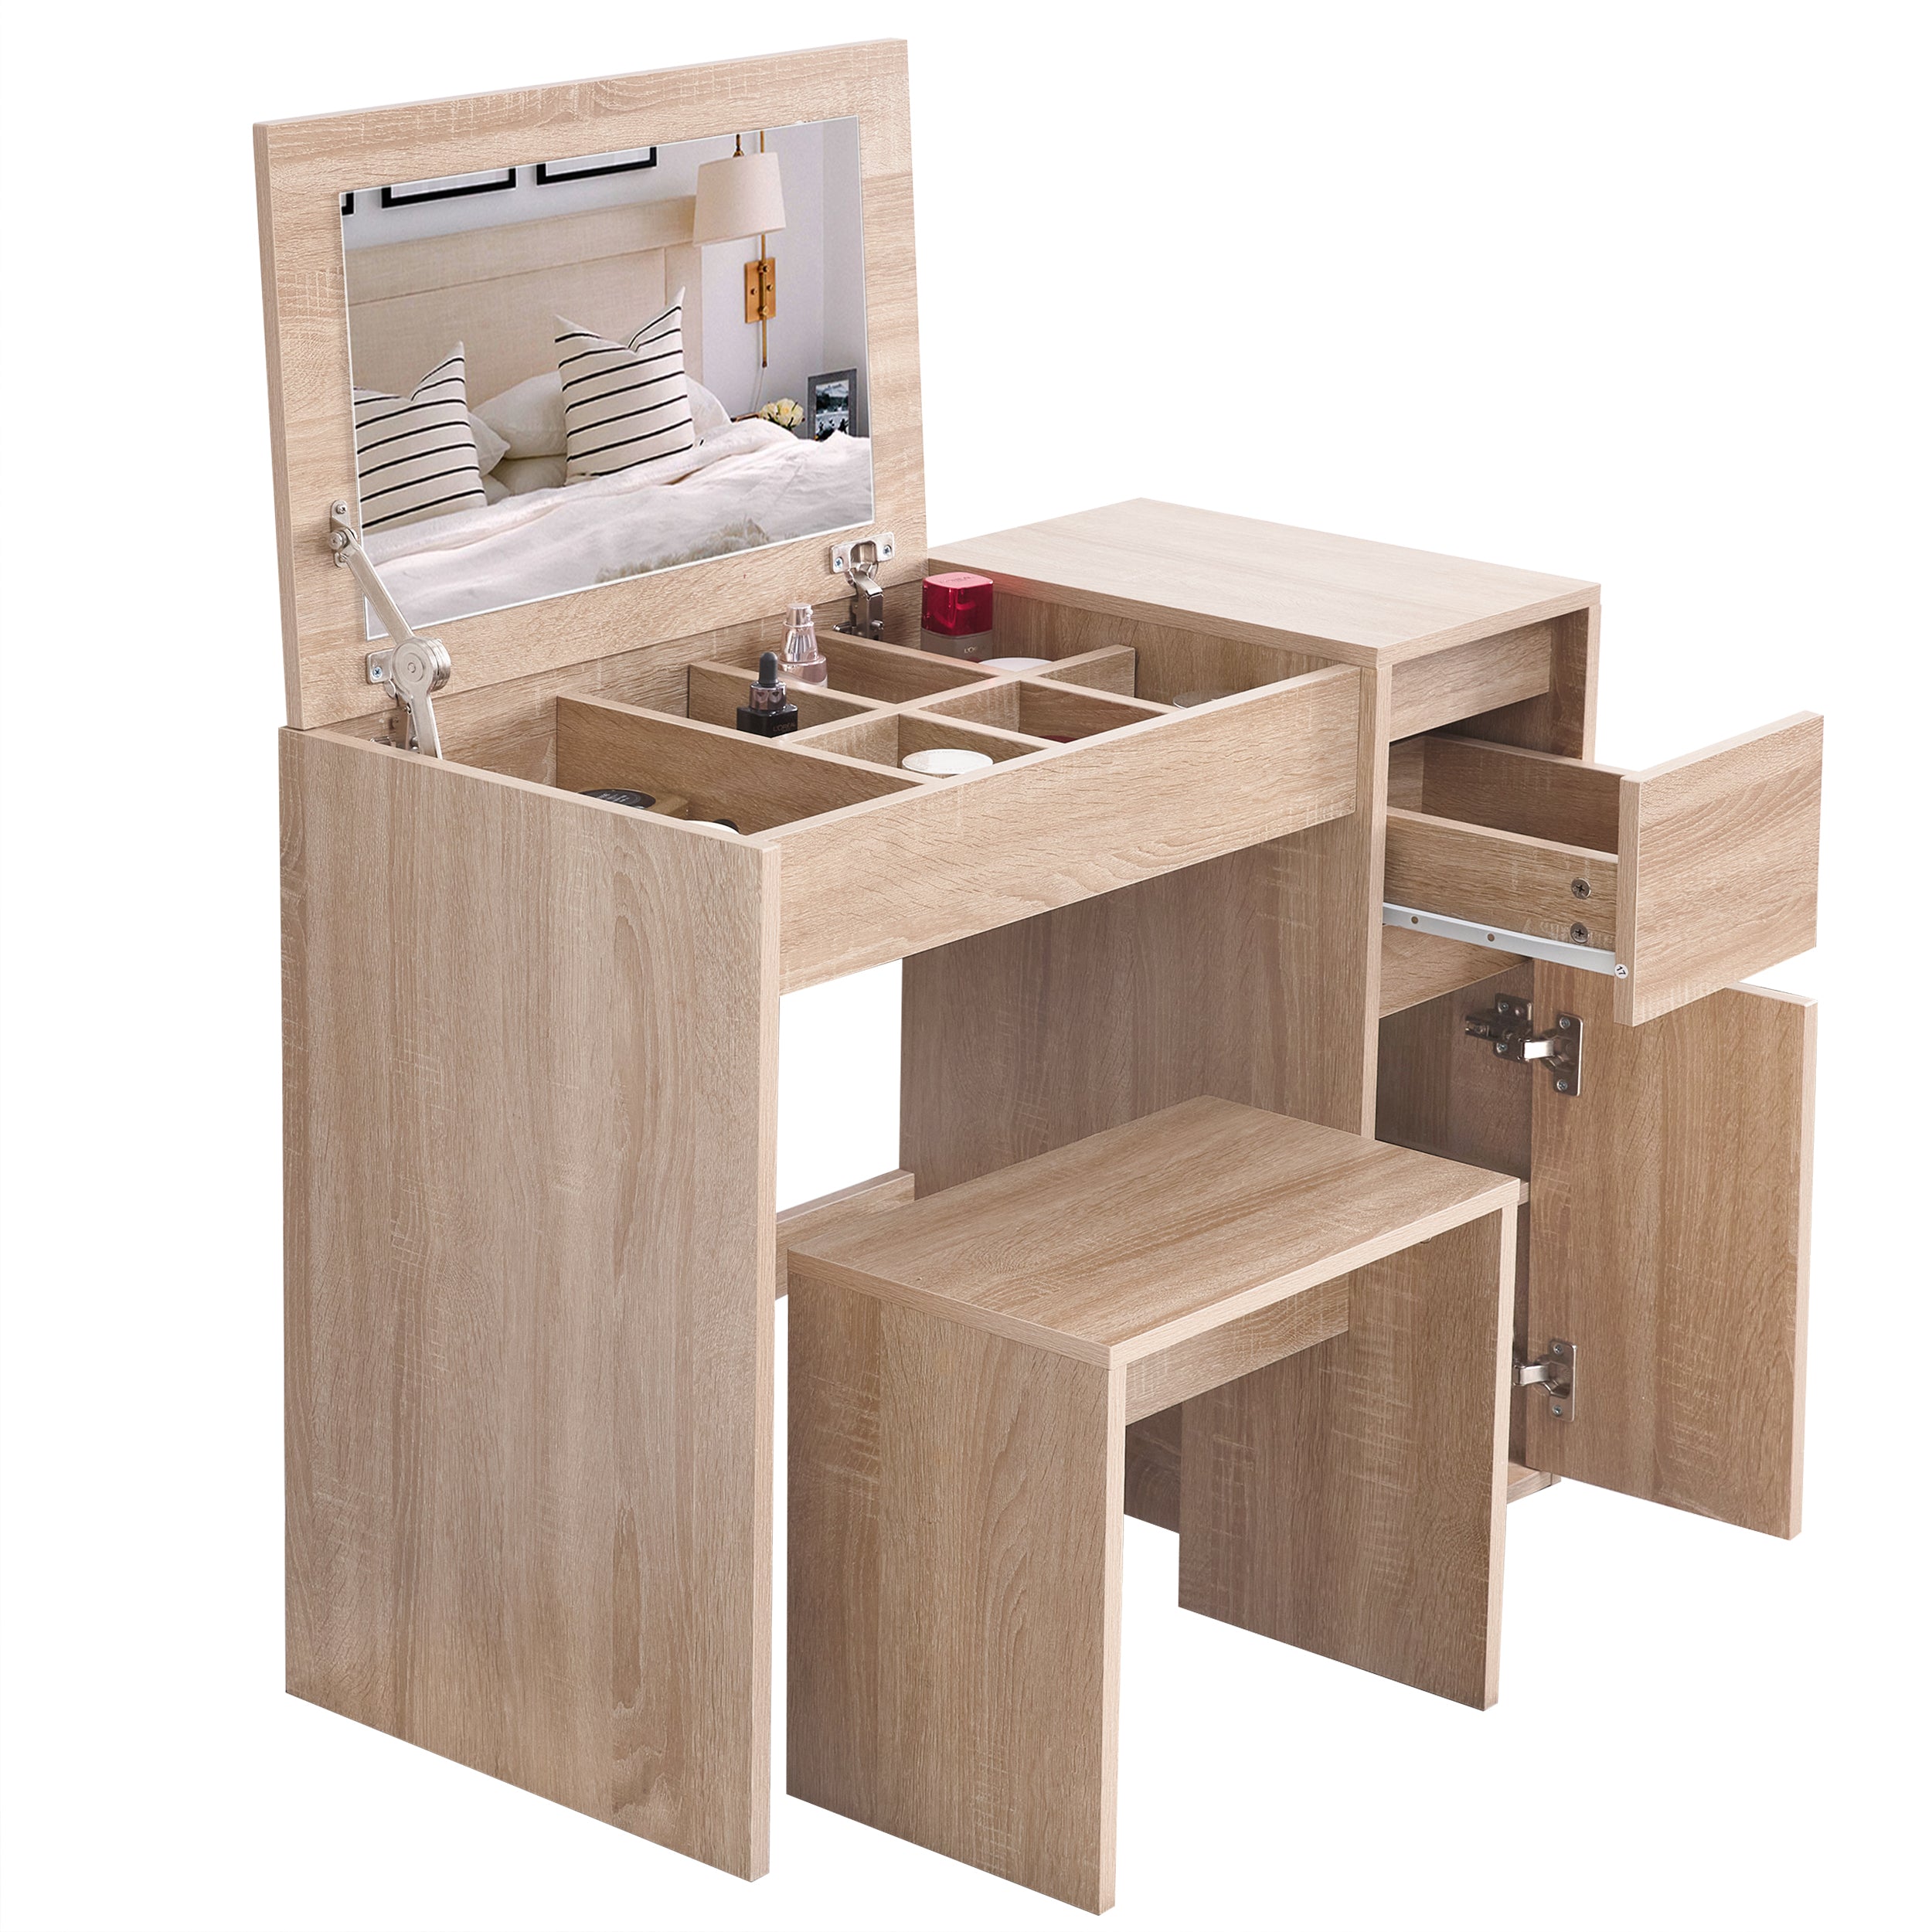 Blisswood Dressing Table Set: Transform Your Space with Stylish Practicality